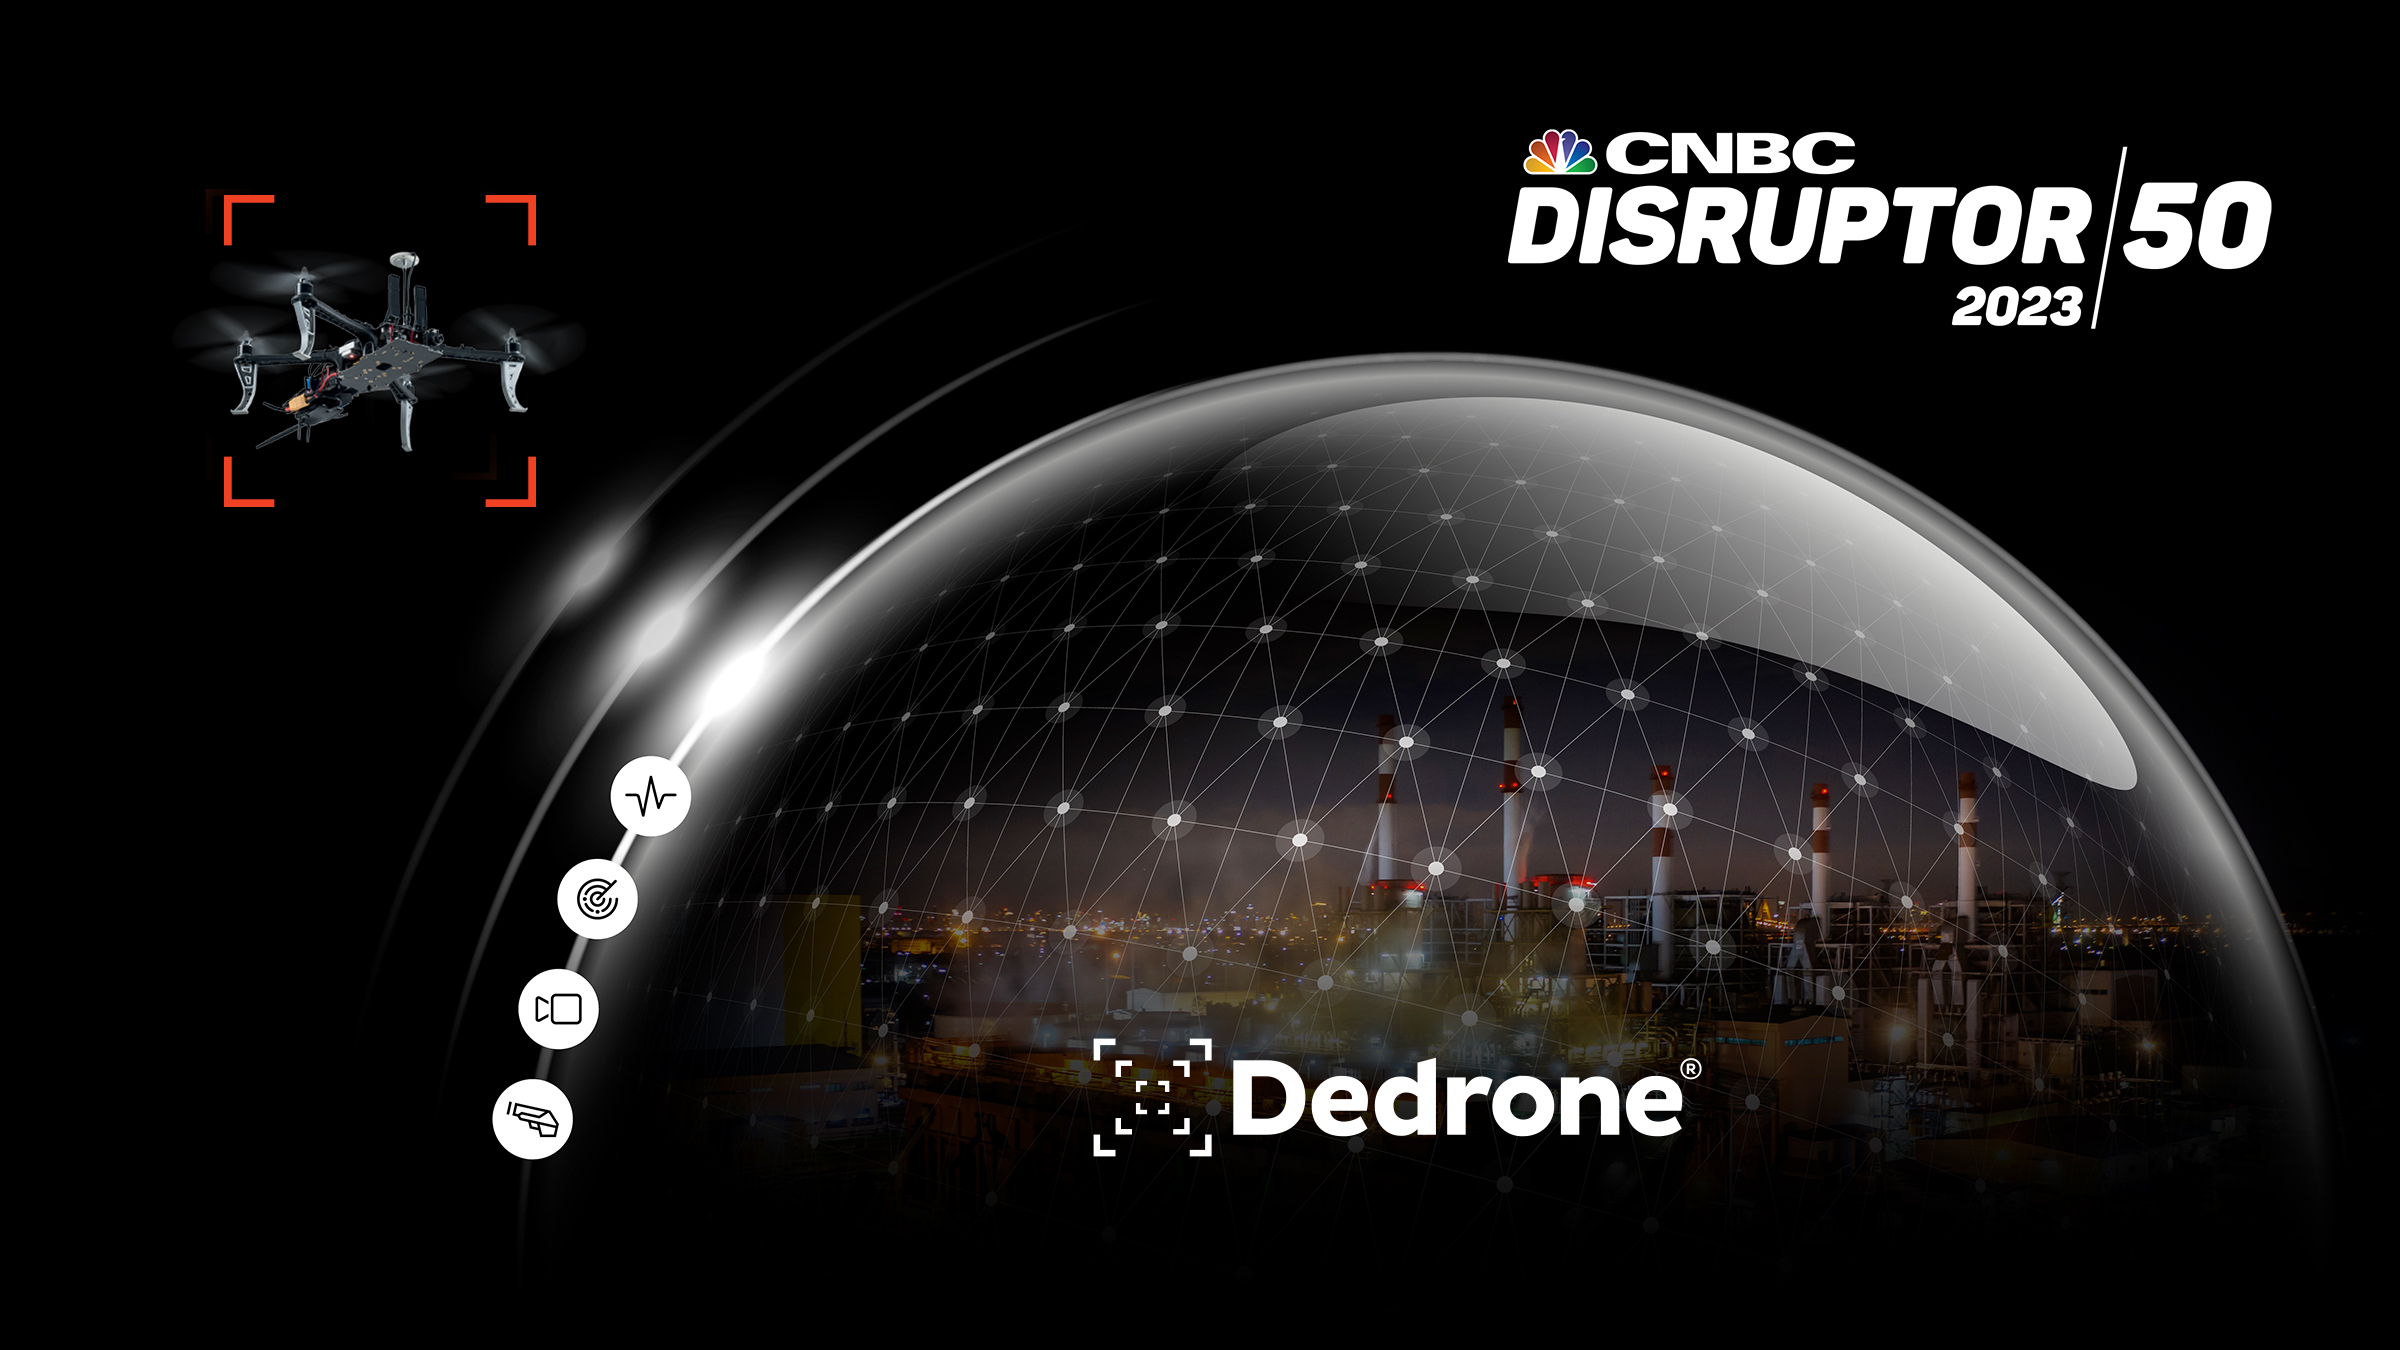 Dedrone Named to the 2023 CNBC Disruptor 50 for Innovative Leadership